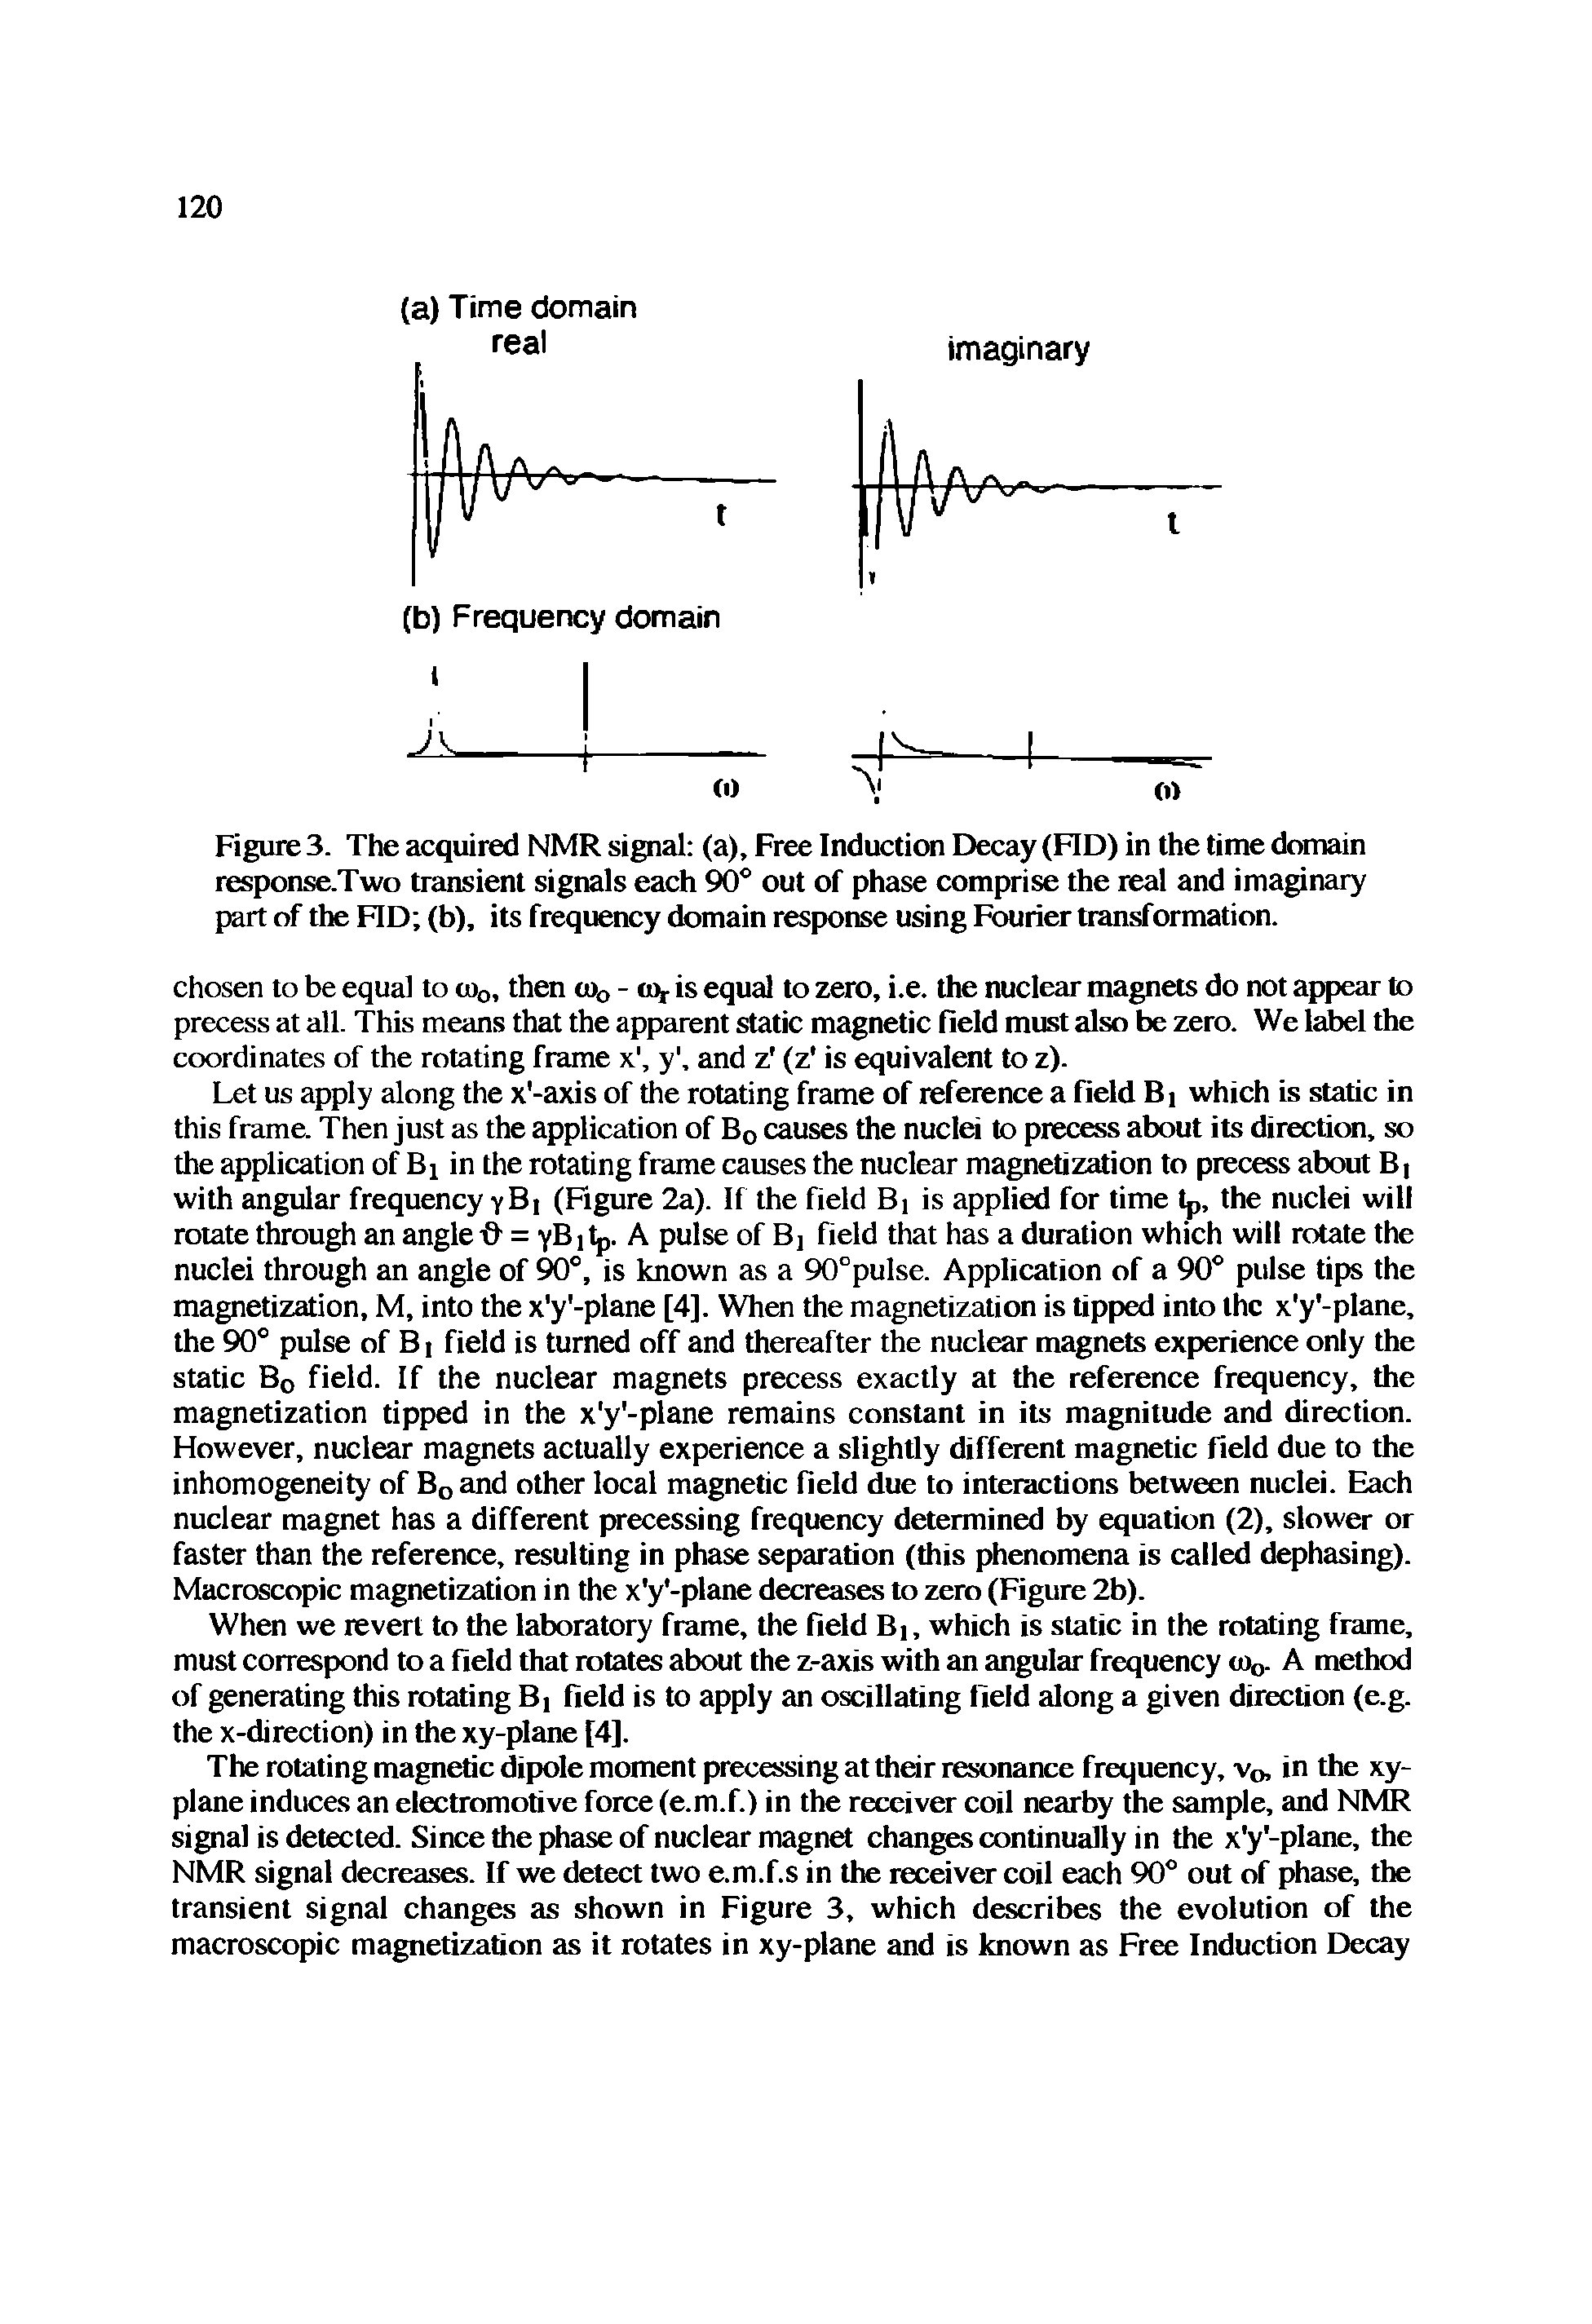 Figure 3. The acquired NMR signal (a), Free Induction Decay (FID) in the time domain response.Two transient signals each 90° out of phase comprise the real and imaginary part of the FID (b), its frequency domain response using Fburier transformation.